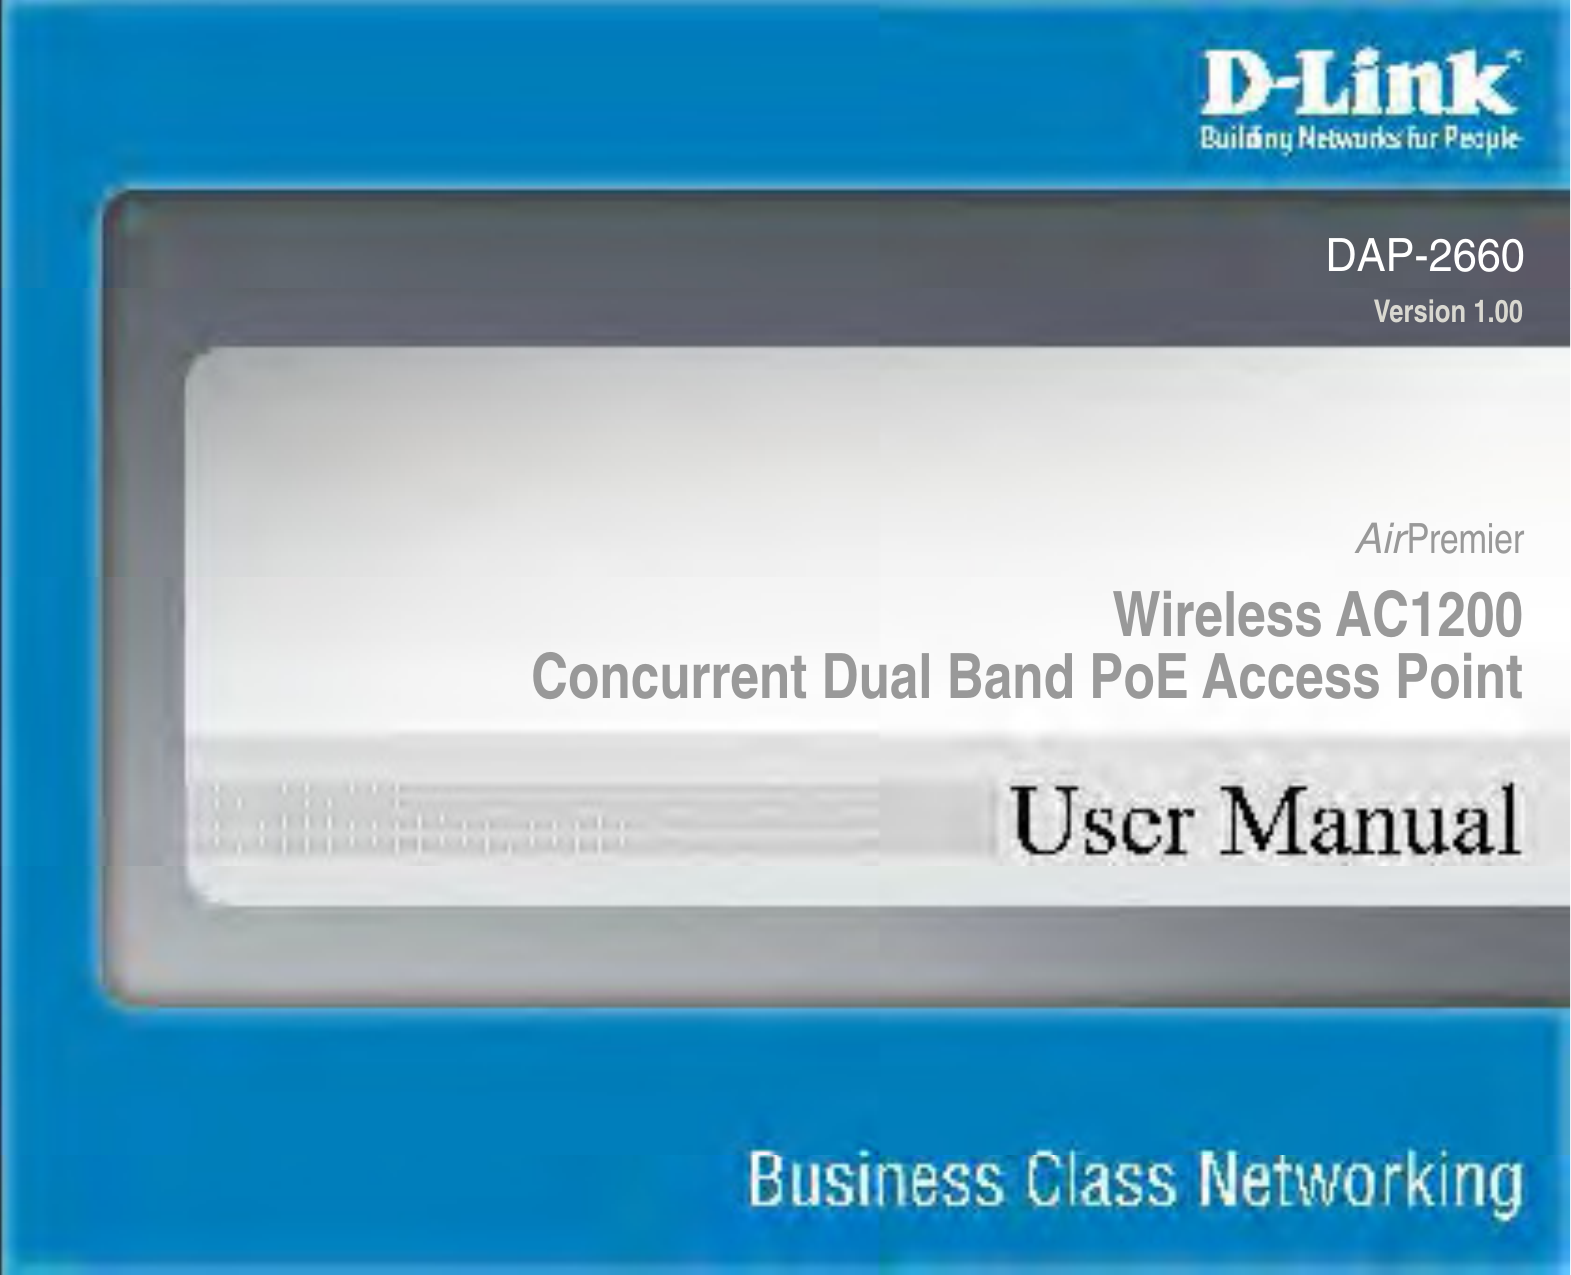 DAP-2660Version 1.00Wireless AC1200 Concurrent Dual Band PoE Access PointAirPremier